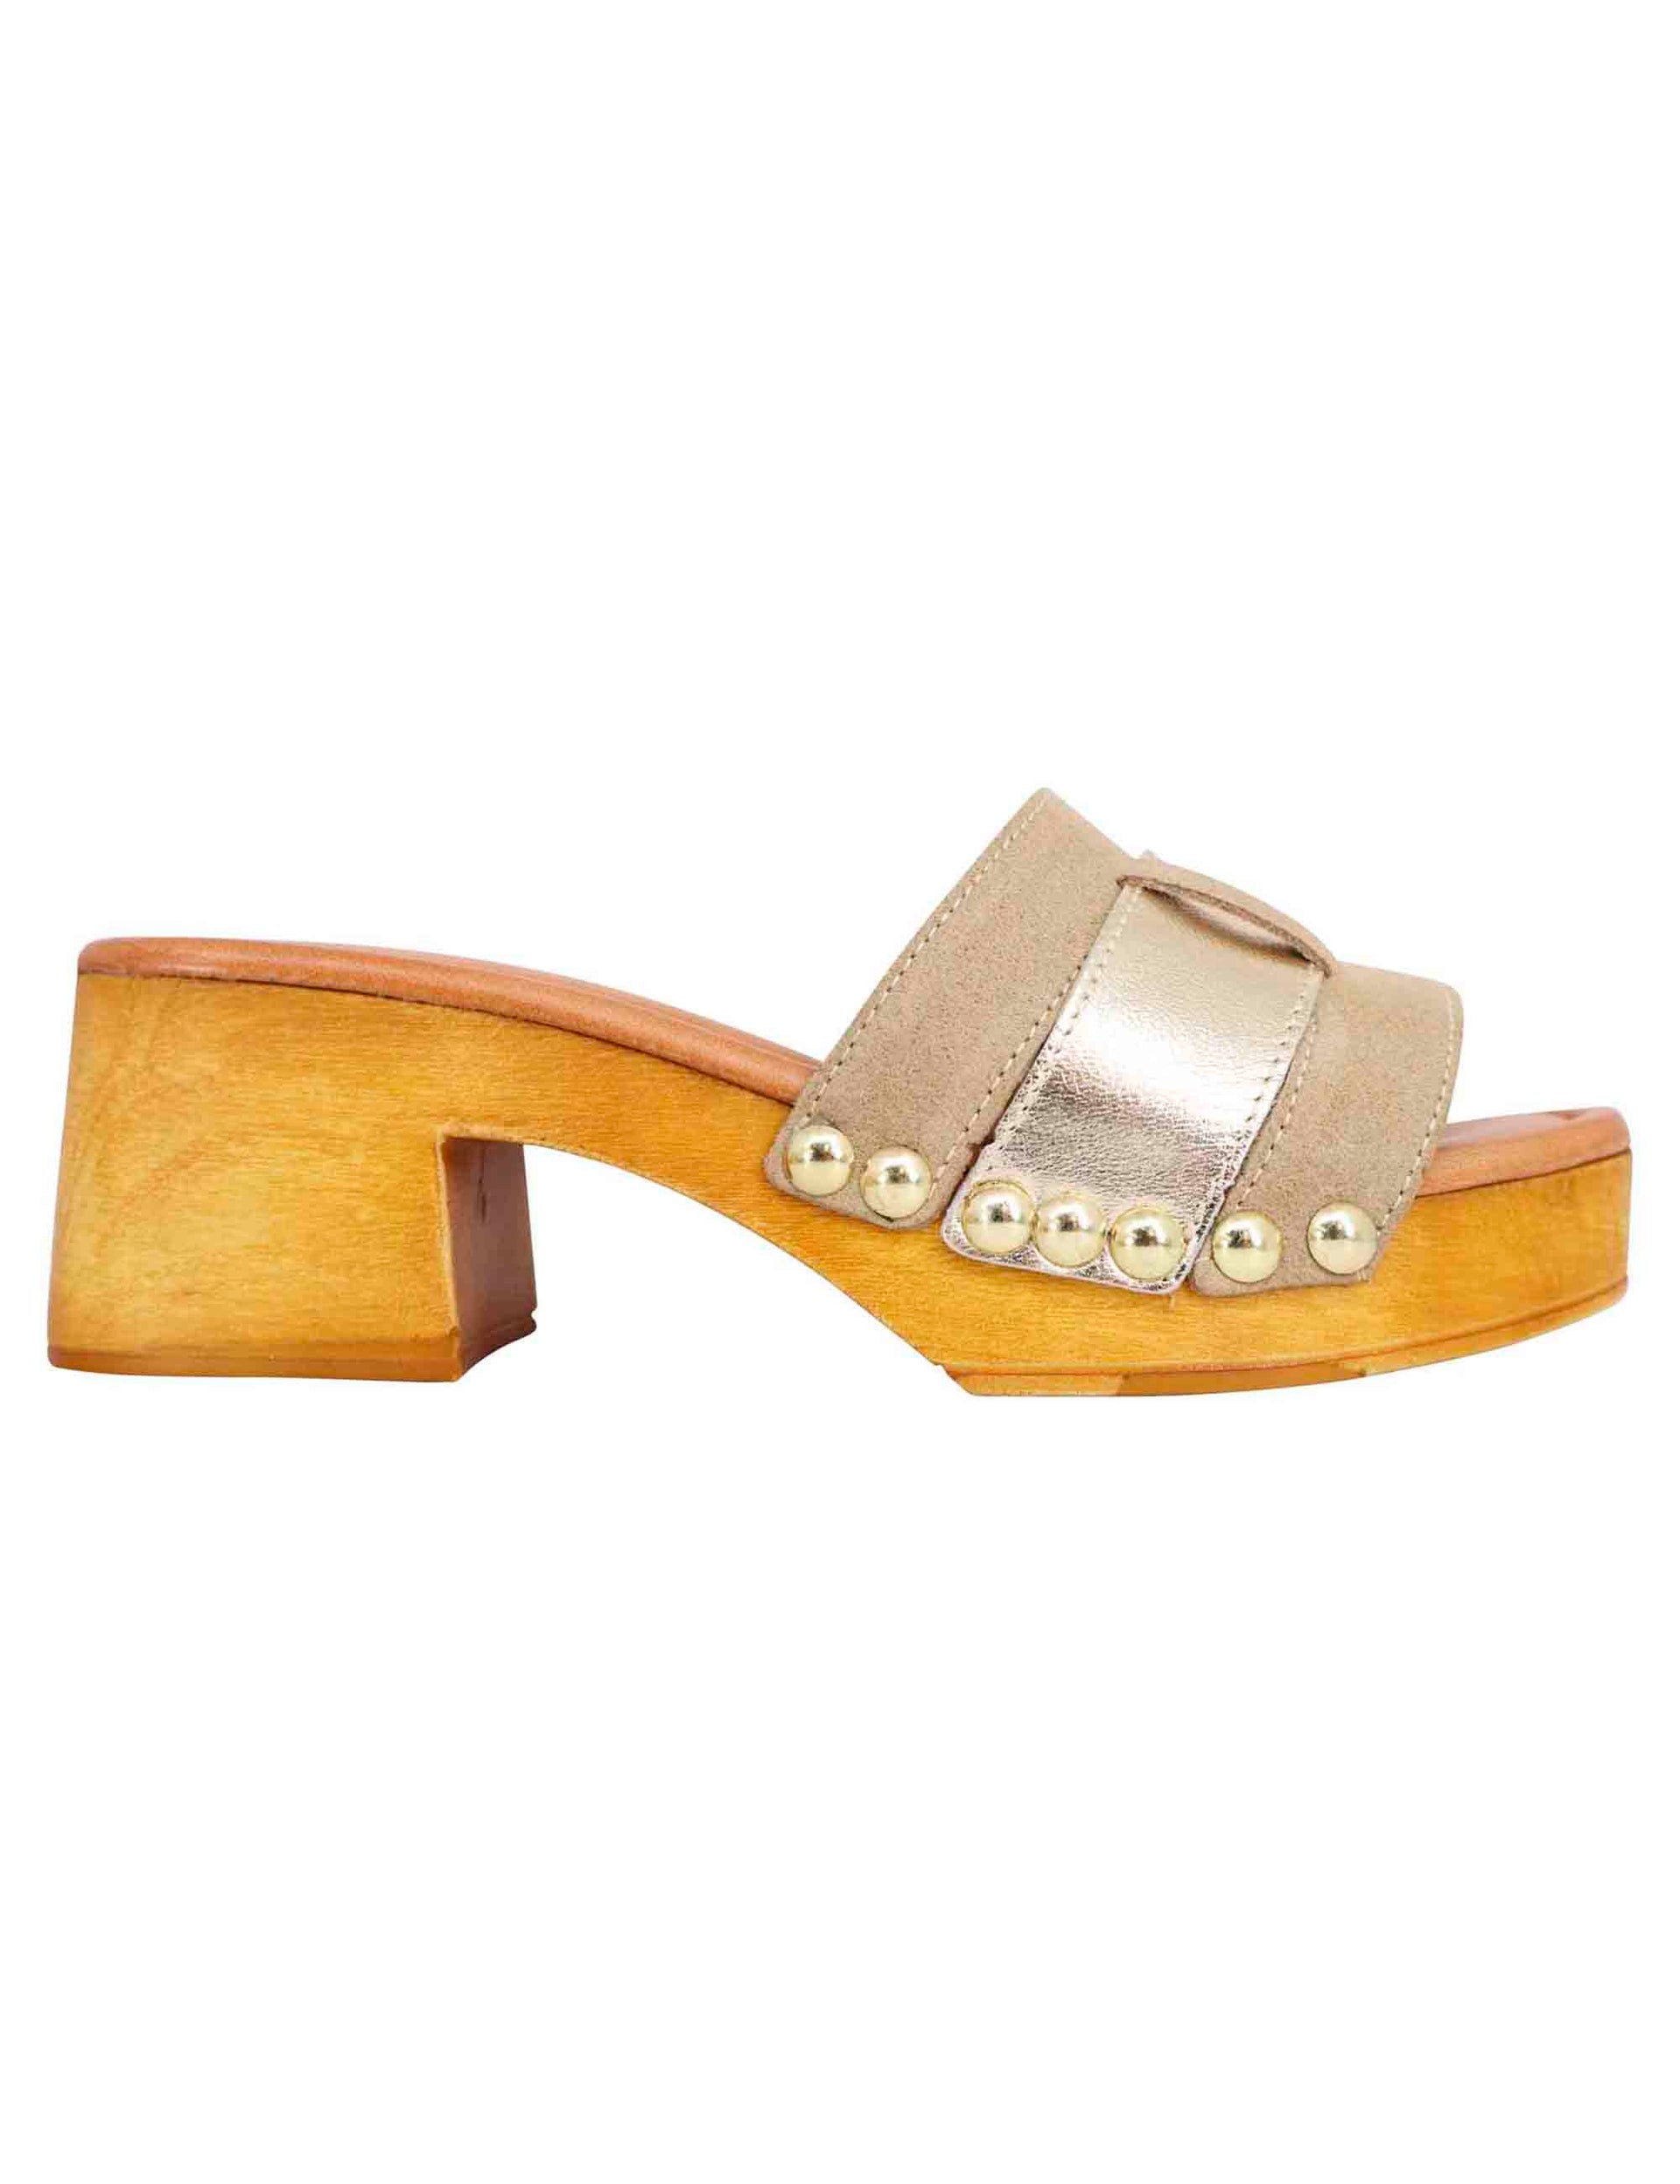 Women's clog sandals in gold leather with studs